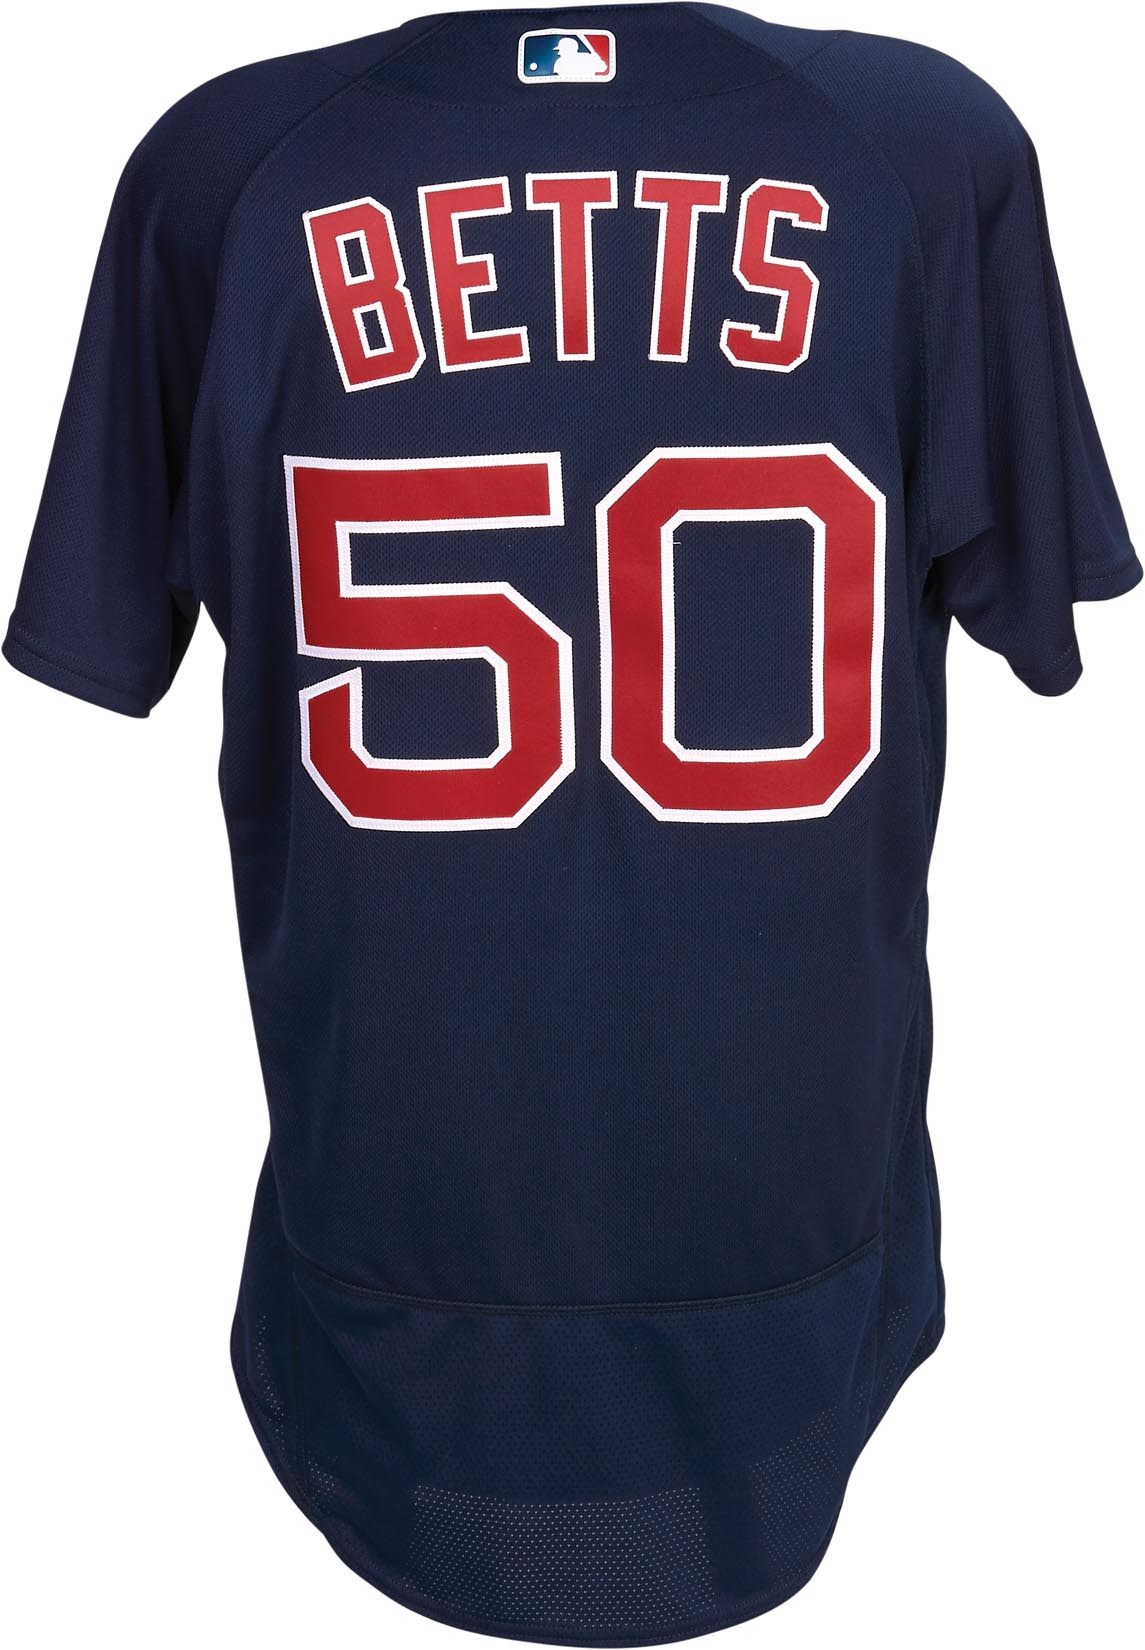 Boston Sports - 2017 Mookie Betts Game Worn "Unwashed" Boston Red Sox Jersey - 15 Inning Game (MLB Auth. & Photo-Matched)